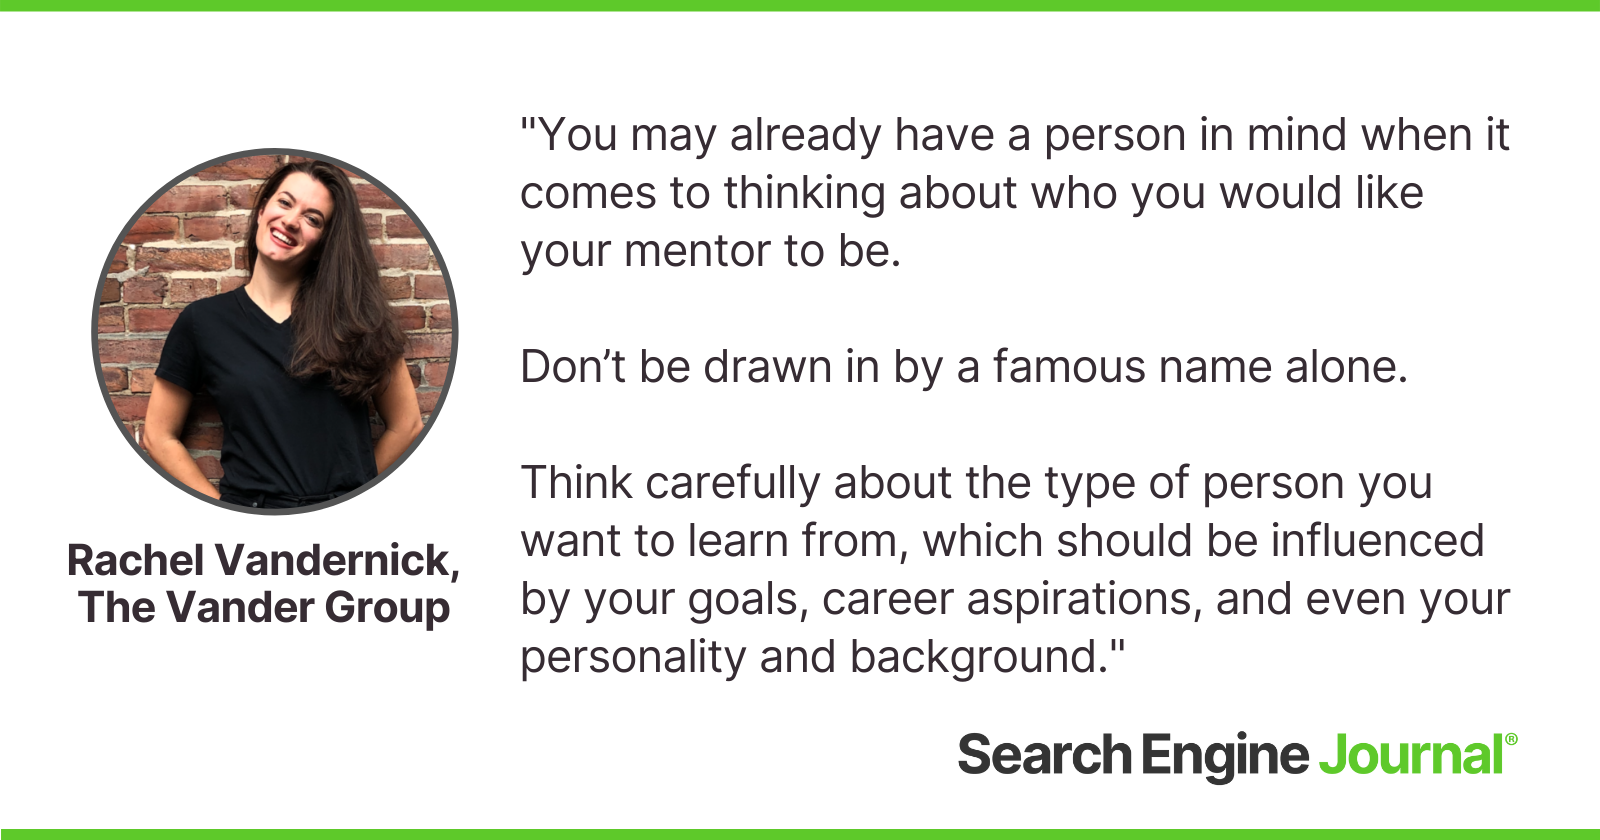 You may already have a person in mind when it comes to thinking about who you would like your mentor to be.  Don’t be drawn in by a famous name alone.  Think carefully about the type of person you want to learn from, which should be influenced by your goals, career aspirations, and even your personality and background.